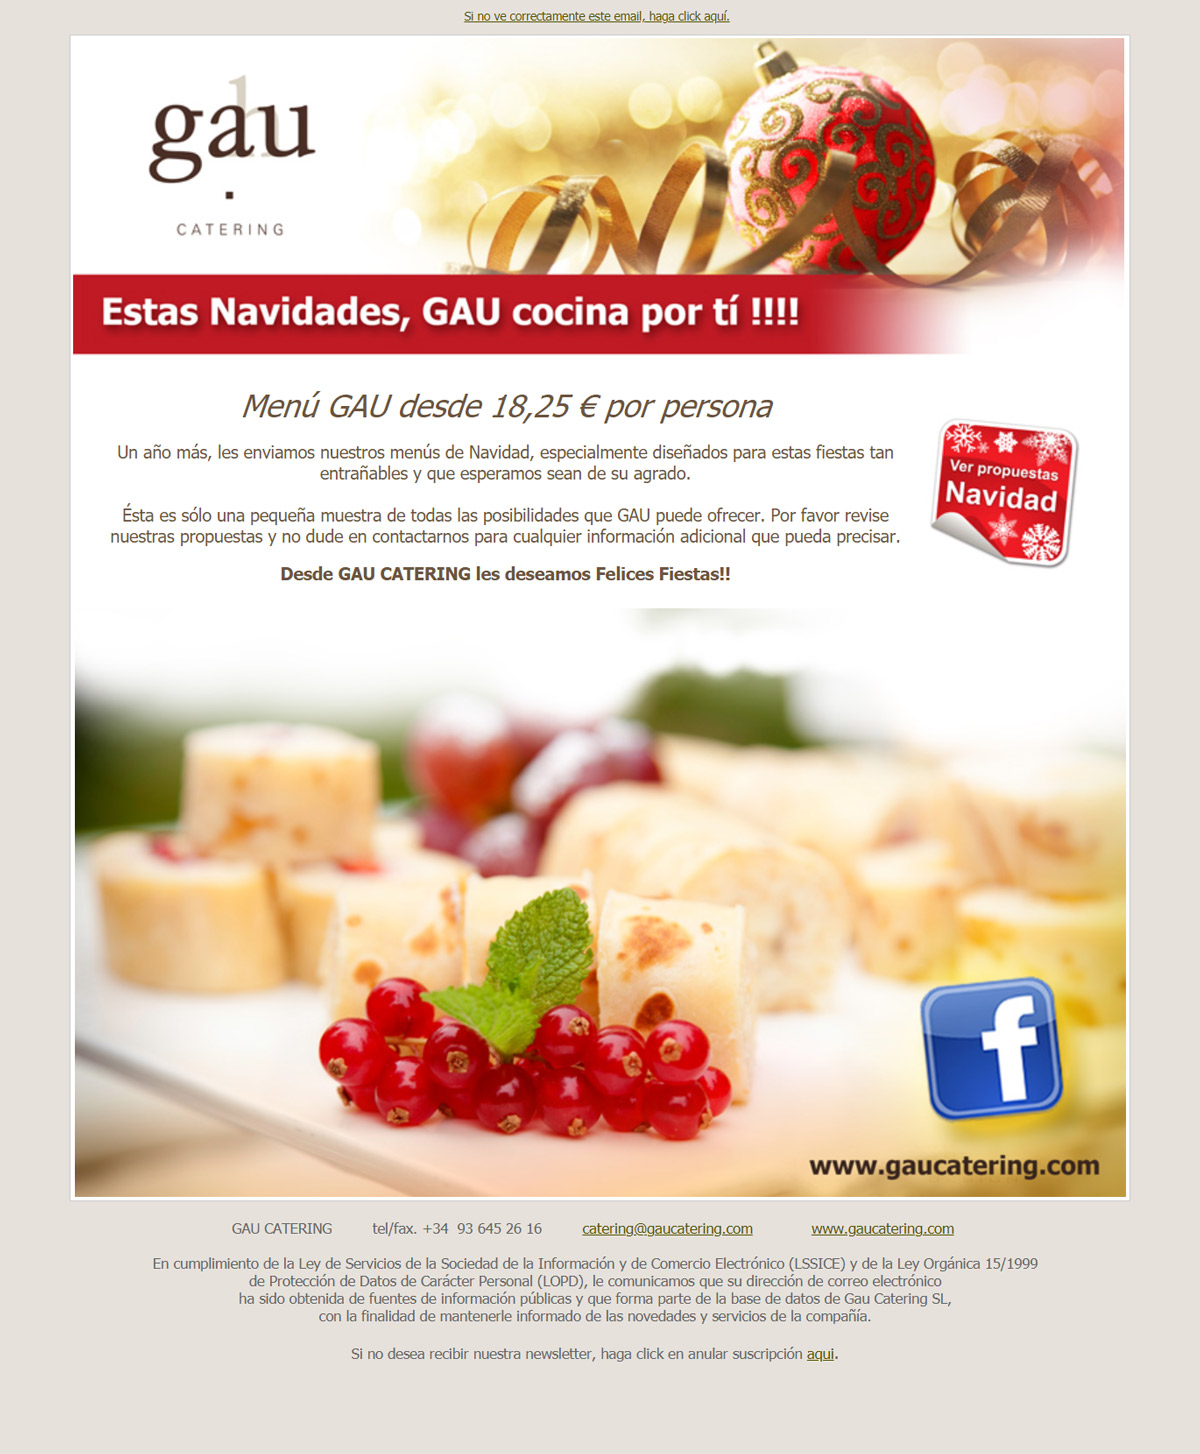 Portfolio of creative graphic design jobs for the creation of newsletters and flyers for the catering, food and beverage company: GAU CATERING AND GOURMET